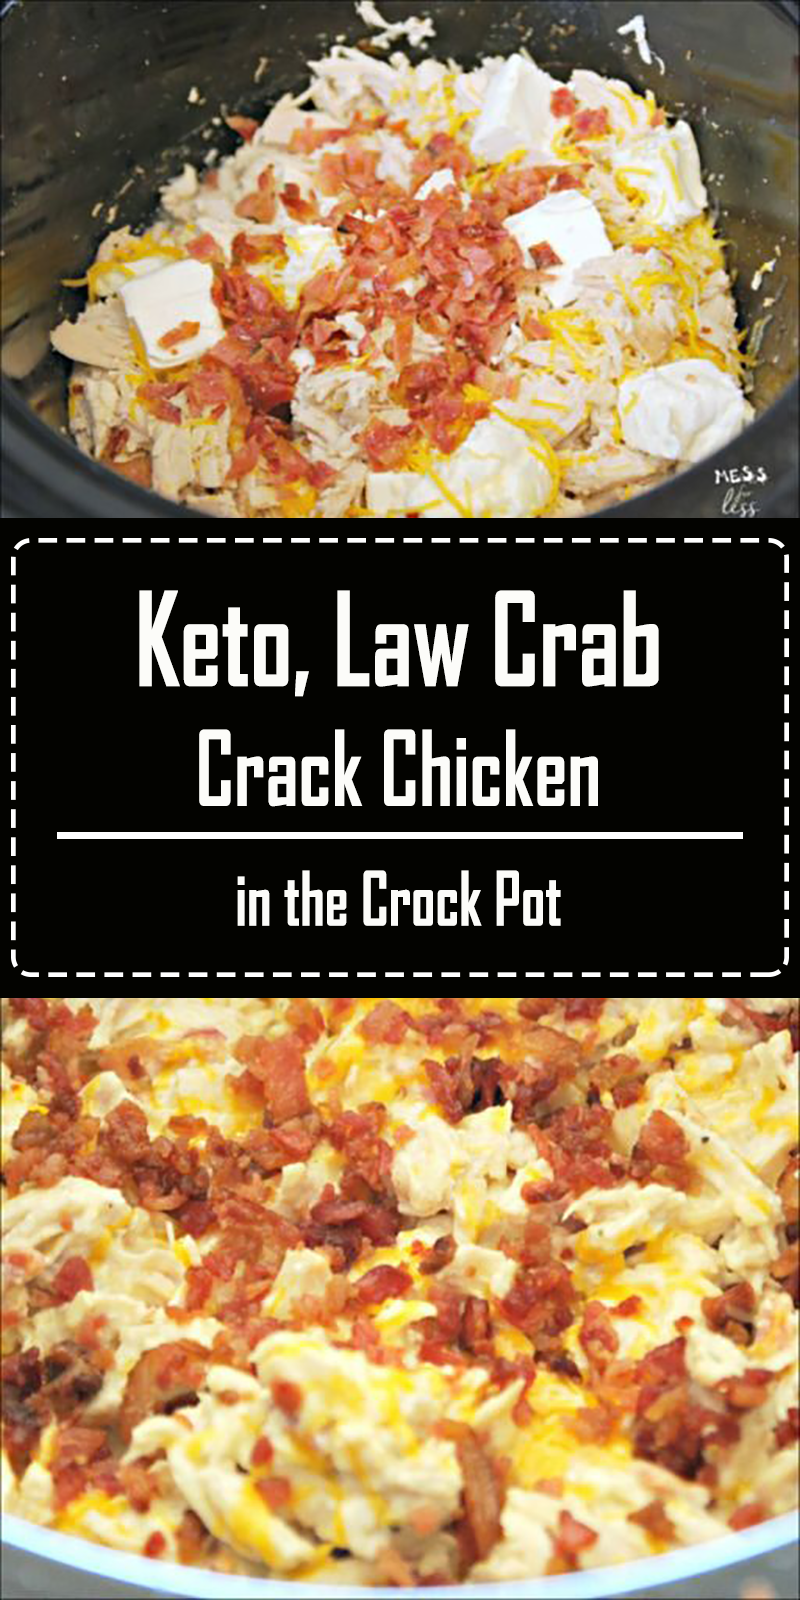 This Crack Chicken in the Crock Pot is keto friendly and low carb. But you don't have to follow a low carb lifestyle to enjoy it. The whole family will love this creamy, cheesy chicken dish. #keto #lowcarb #crockpot #slowcooker #crackchicken #HealthyDinnerRecipesEasy